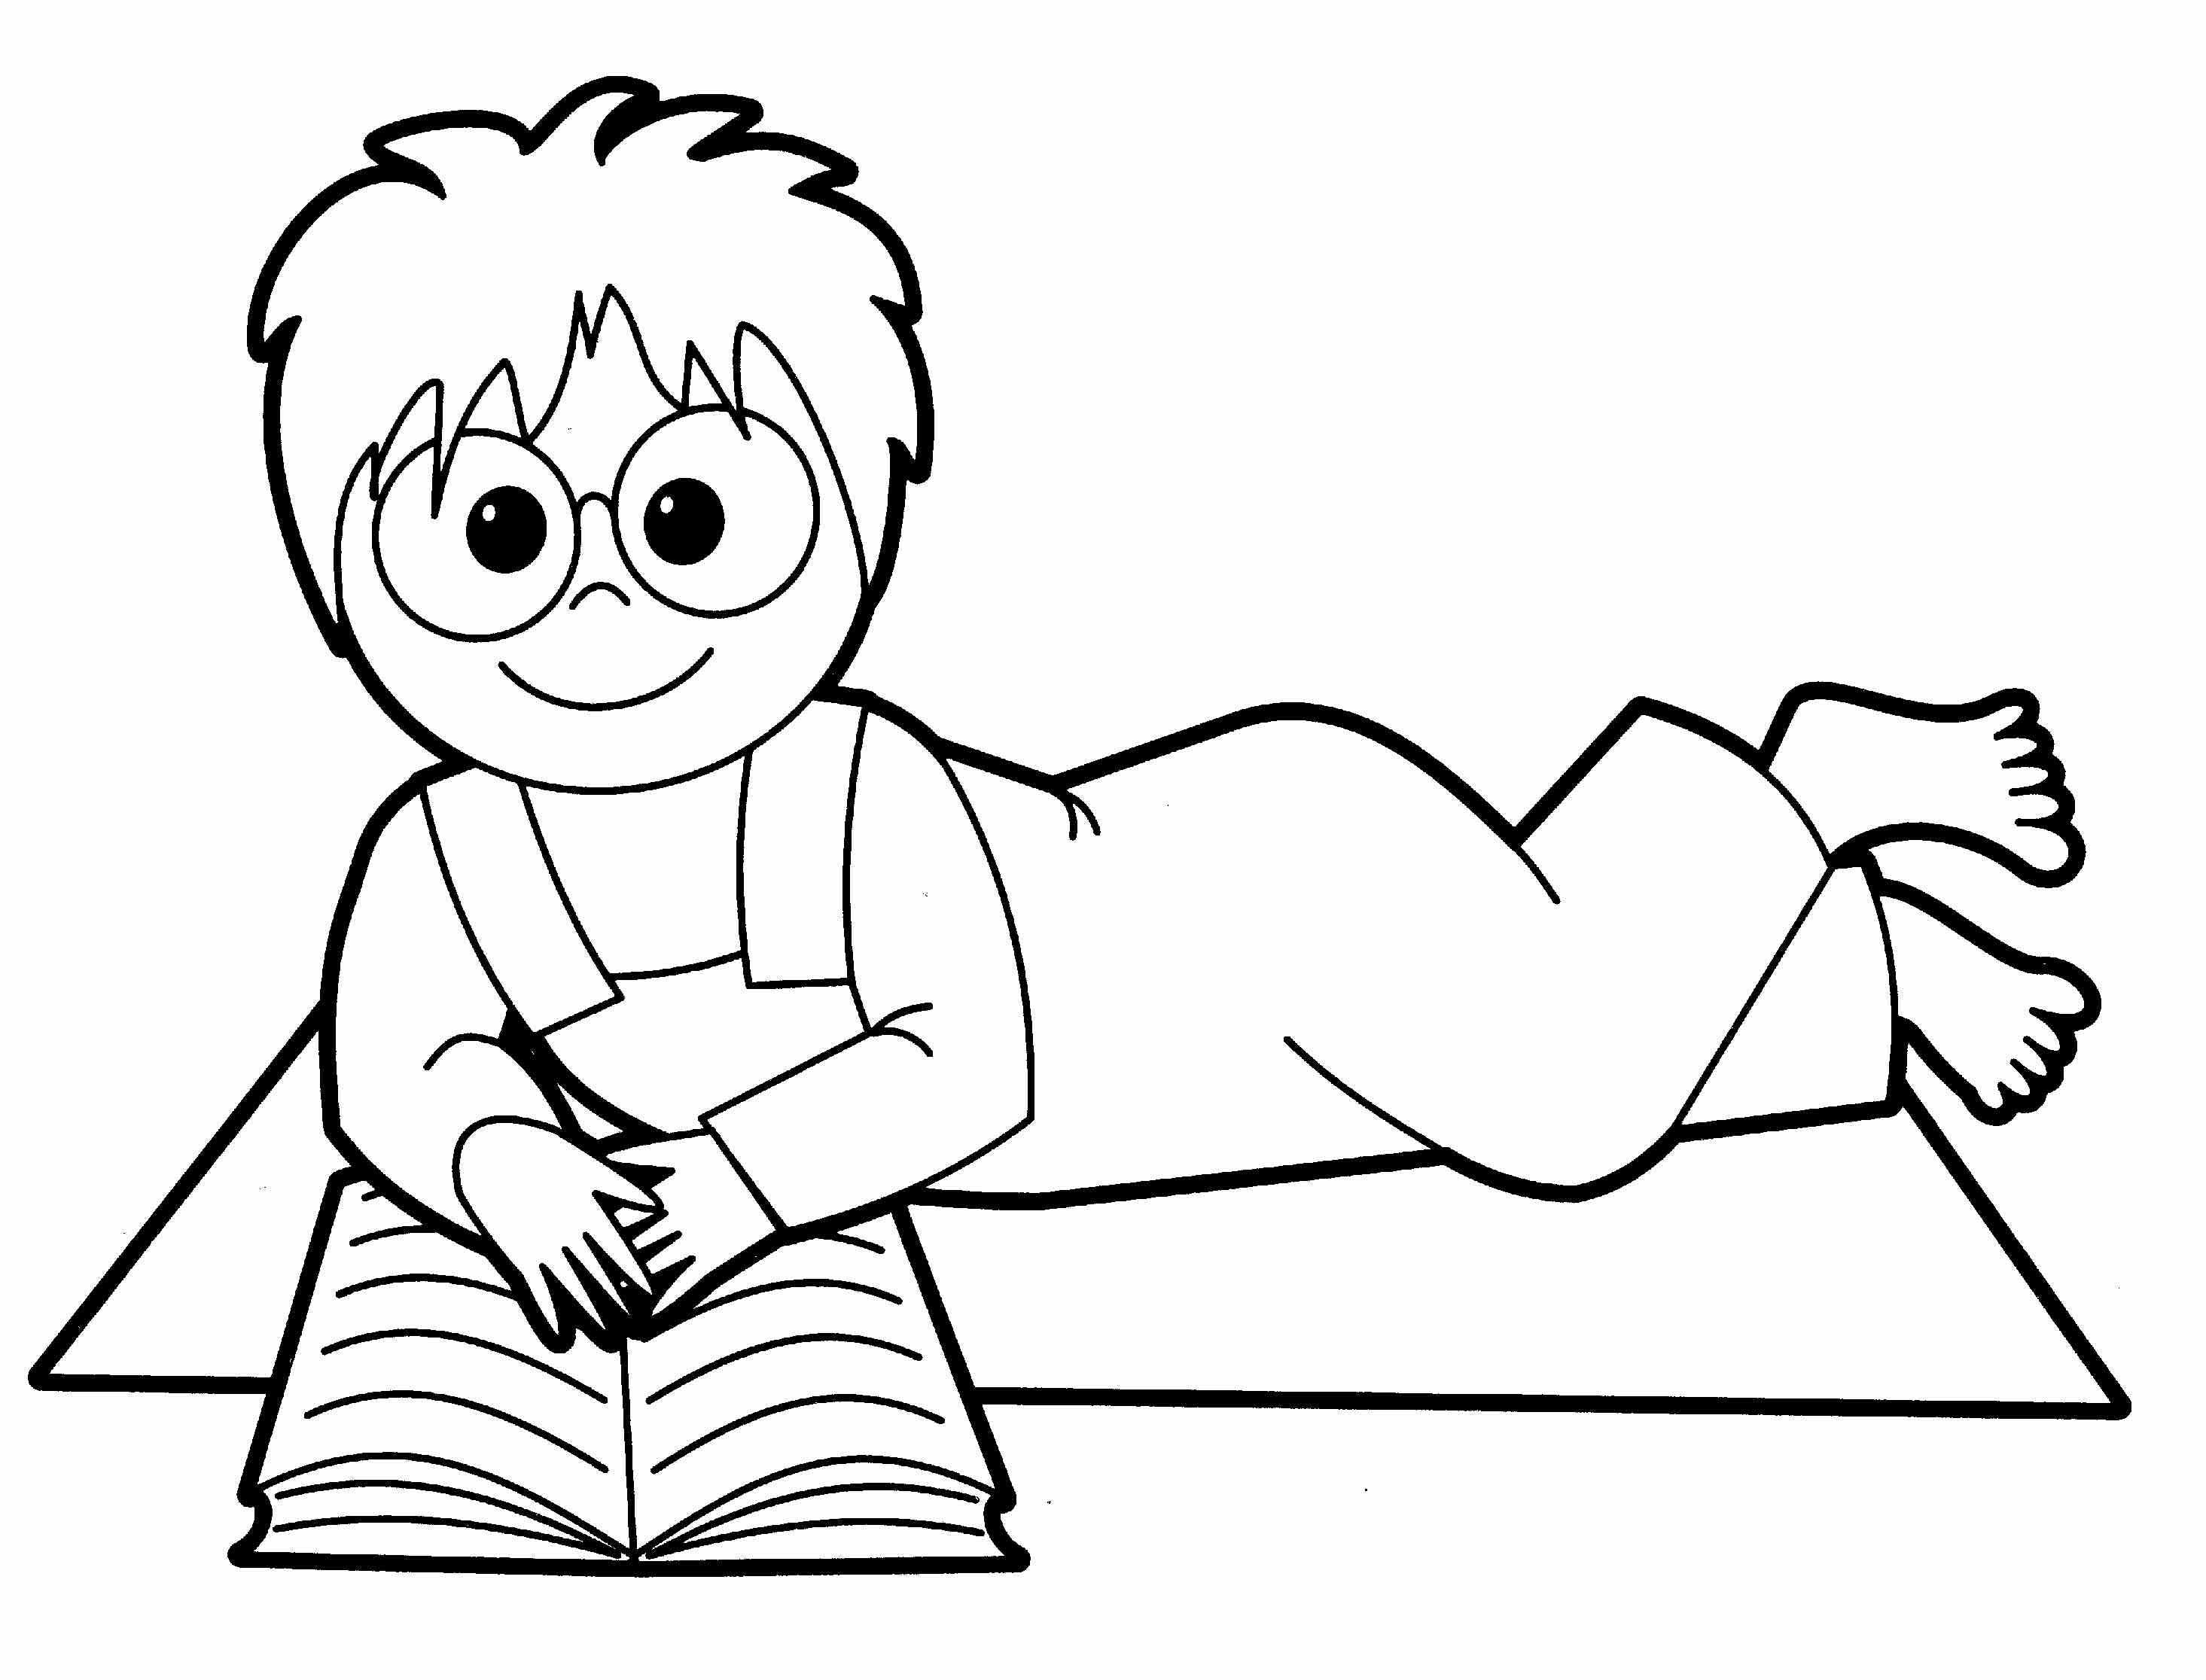 Coloring Pages Of People
 People Coloring Pages coloringsuite